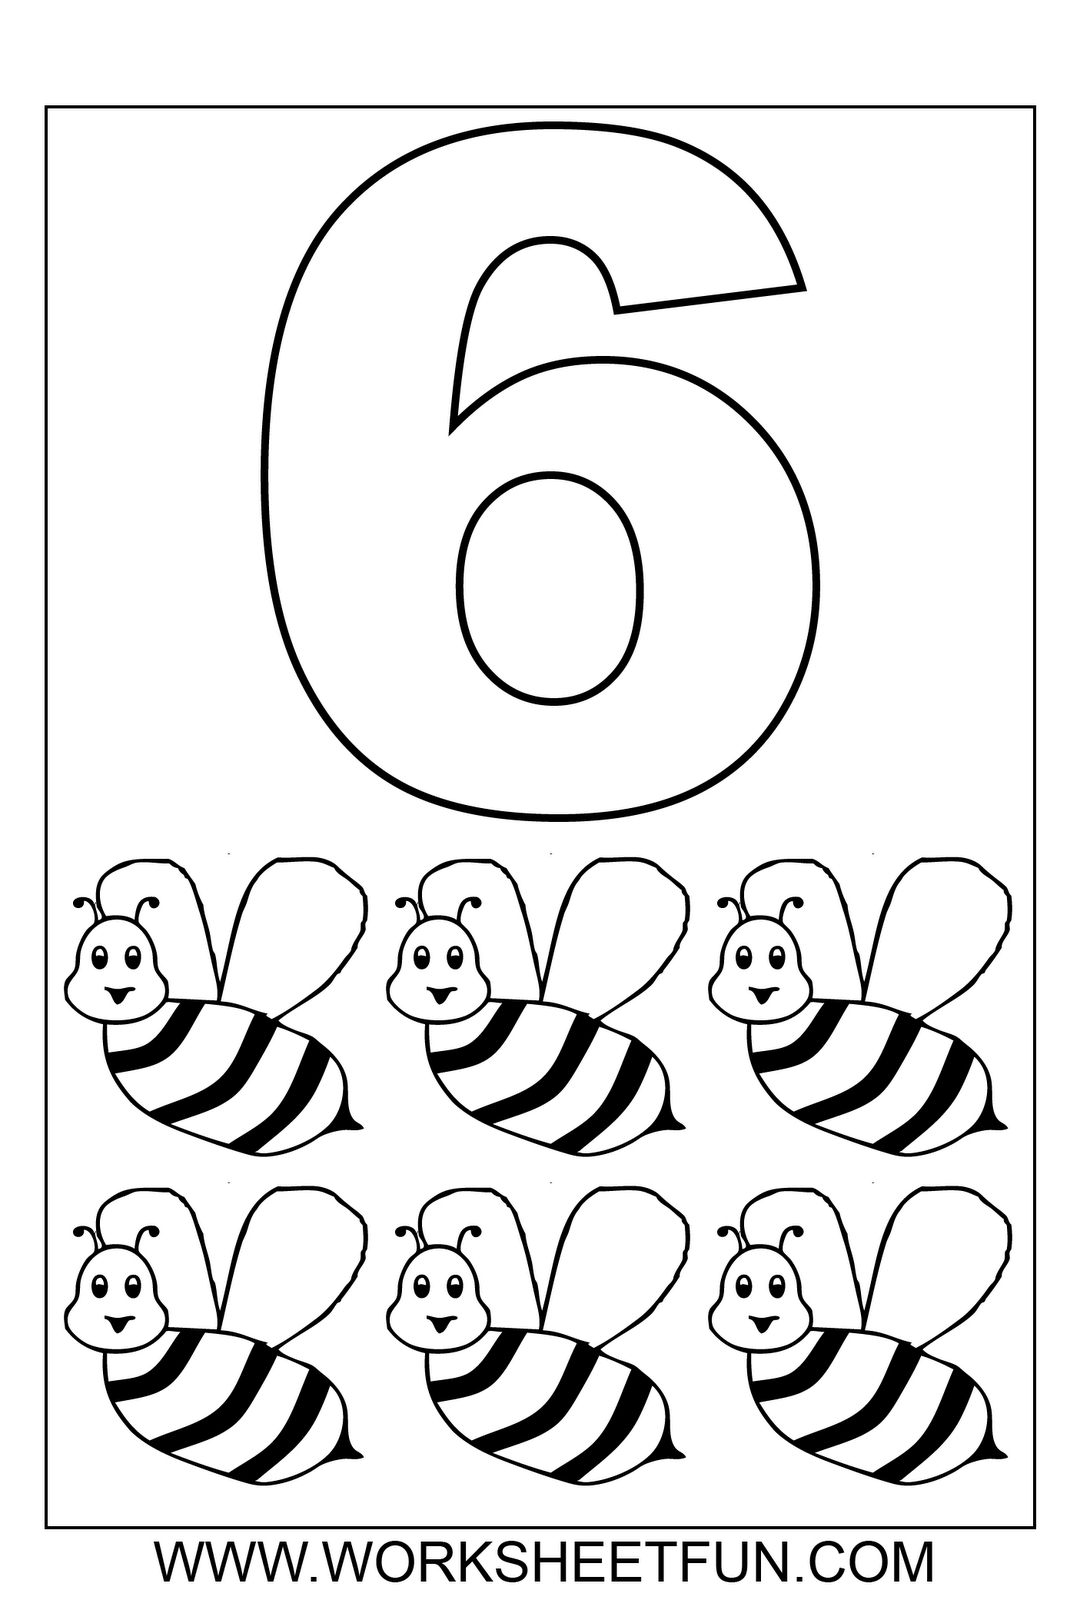 Numbers Coloring Page Number 6 Color Page Free Coloring Library